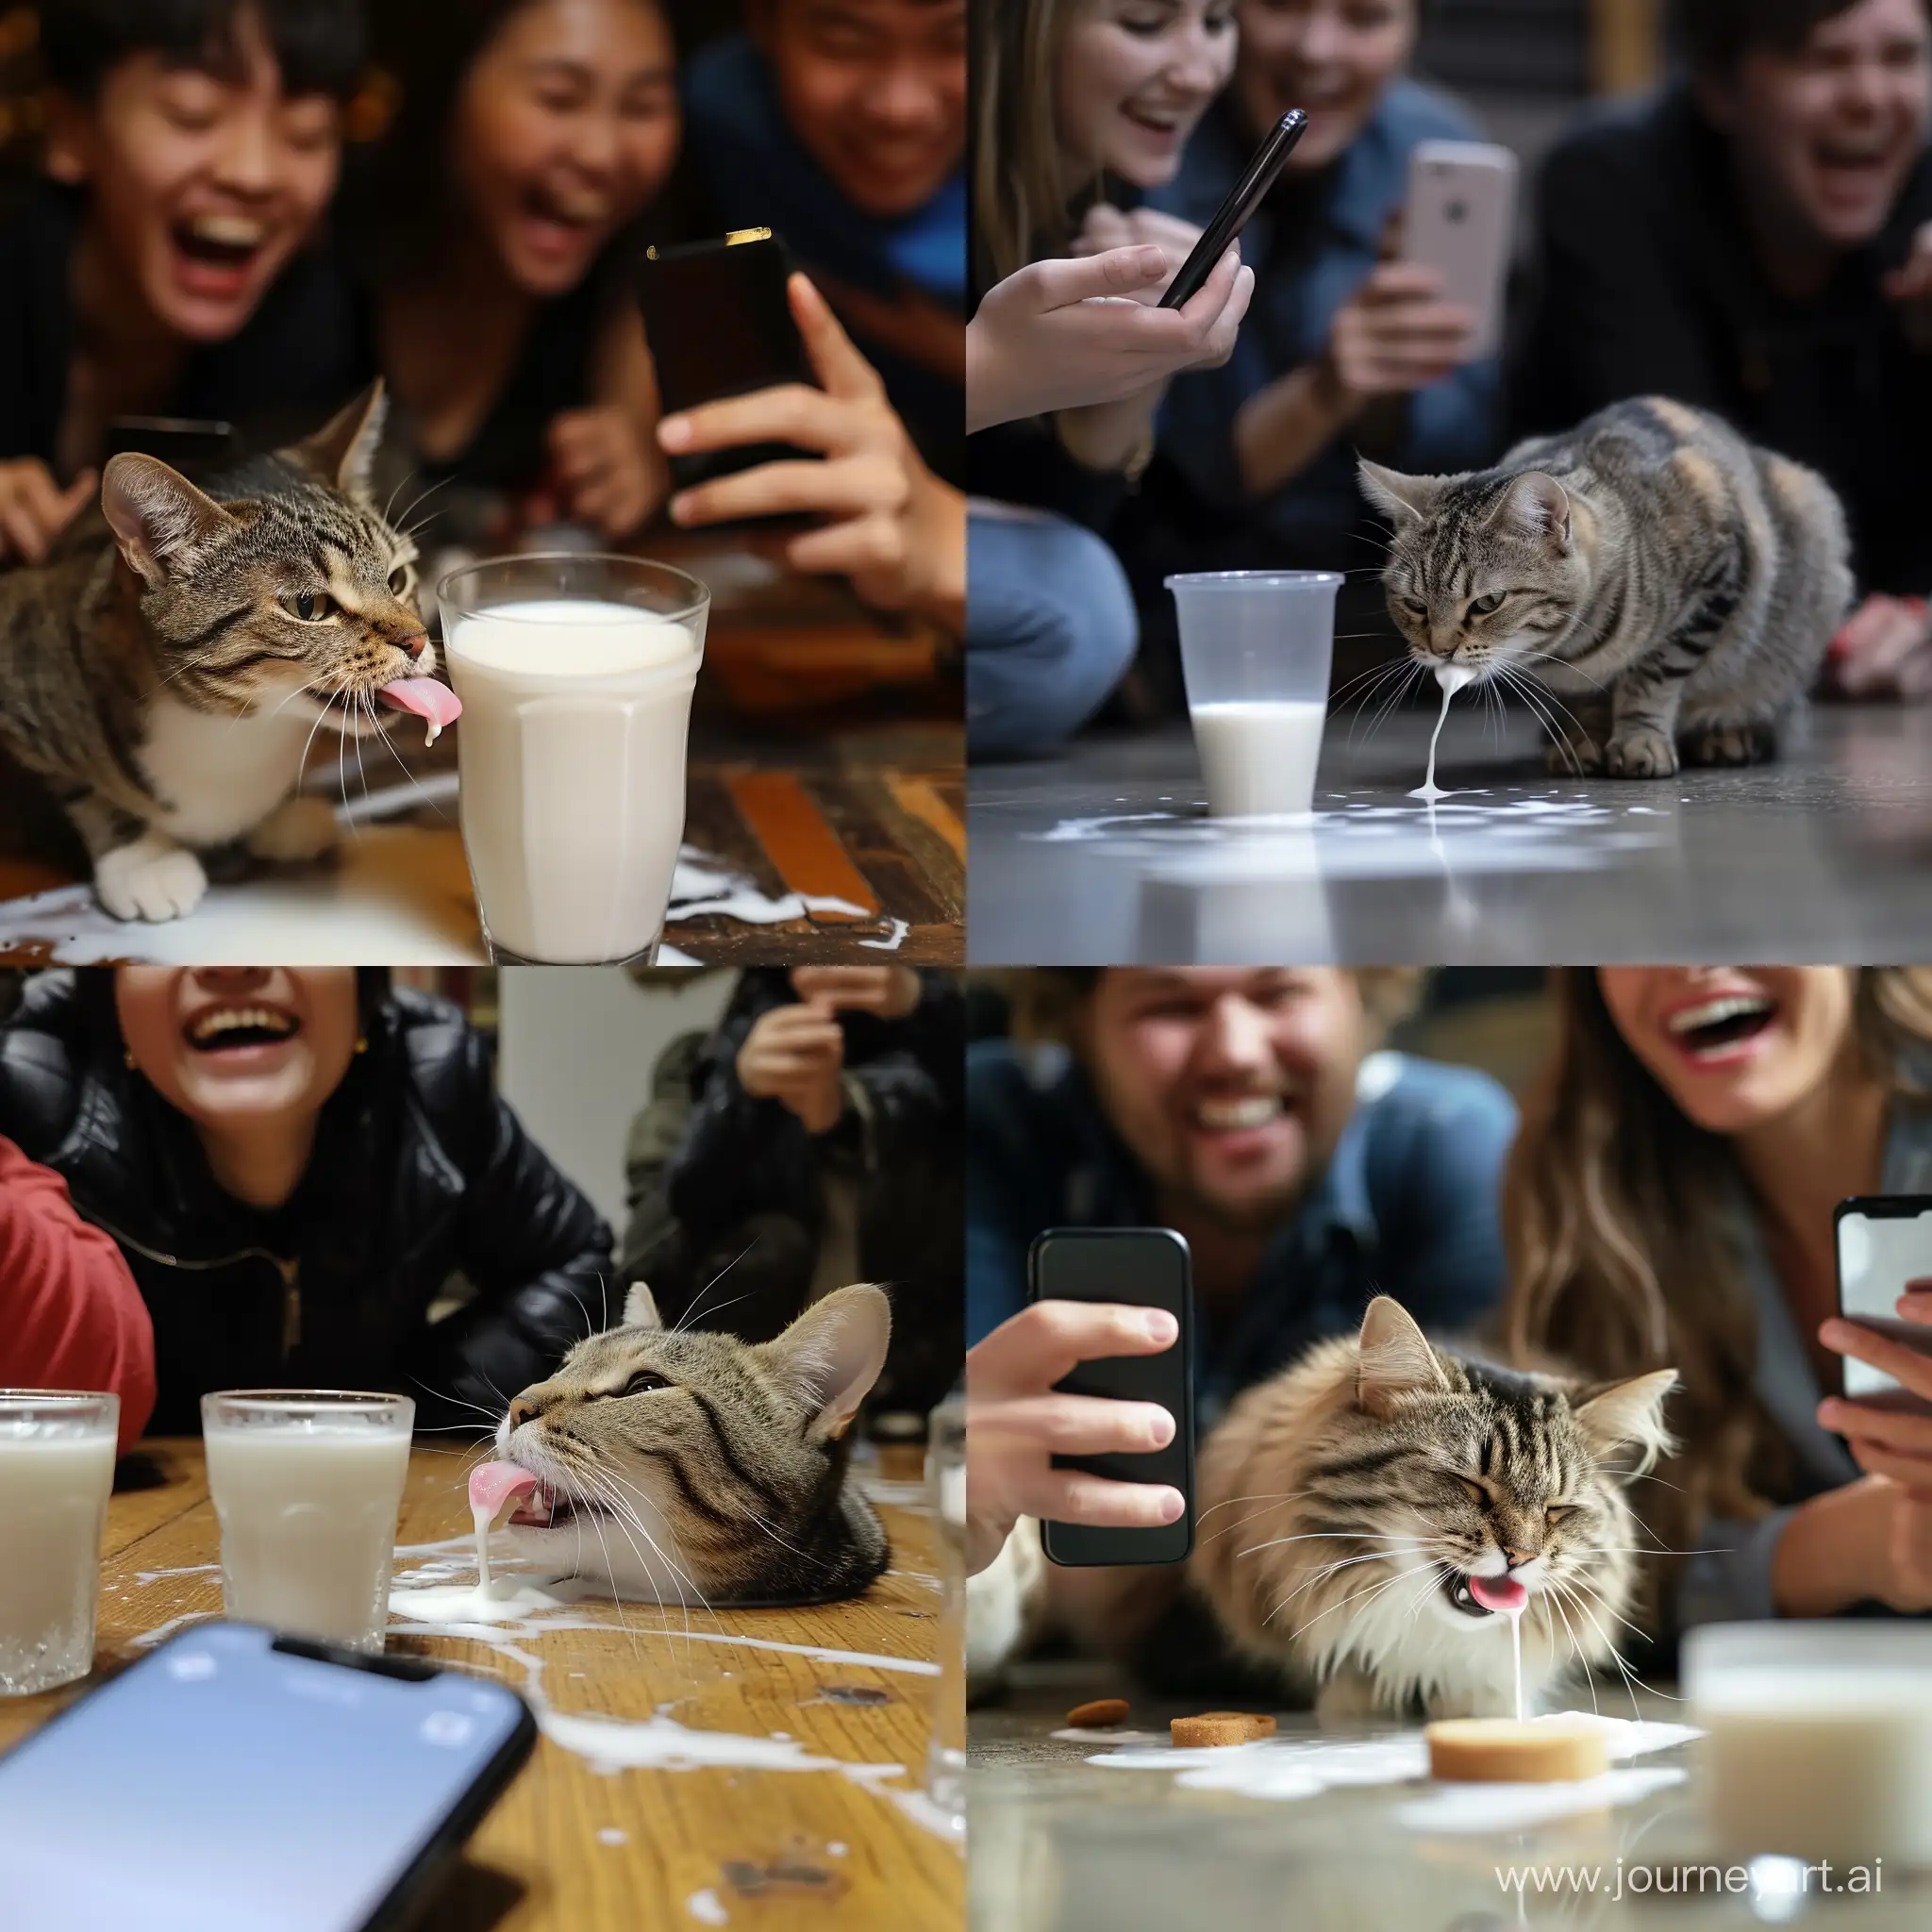 Amusing-Cat-Licking-Spilled-Milk-Captures-LaughterFilled-Moment